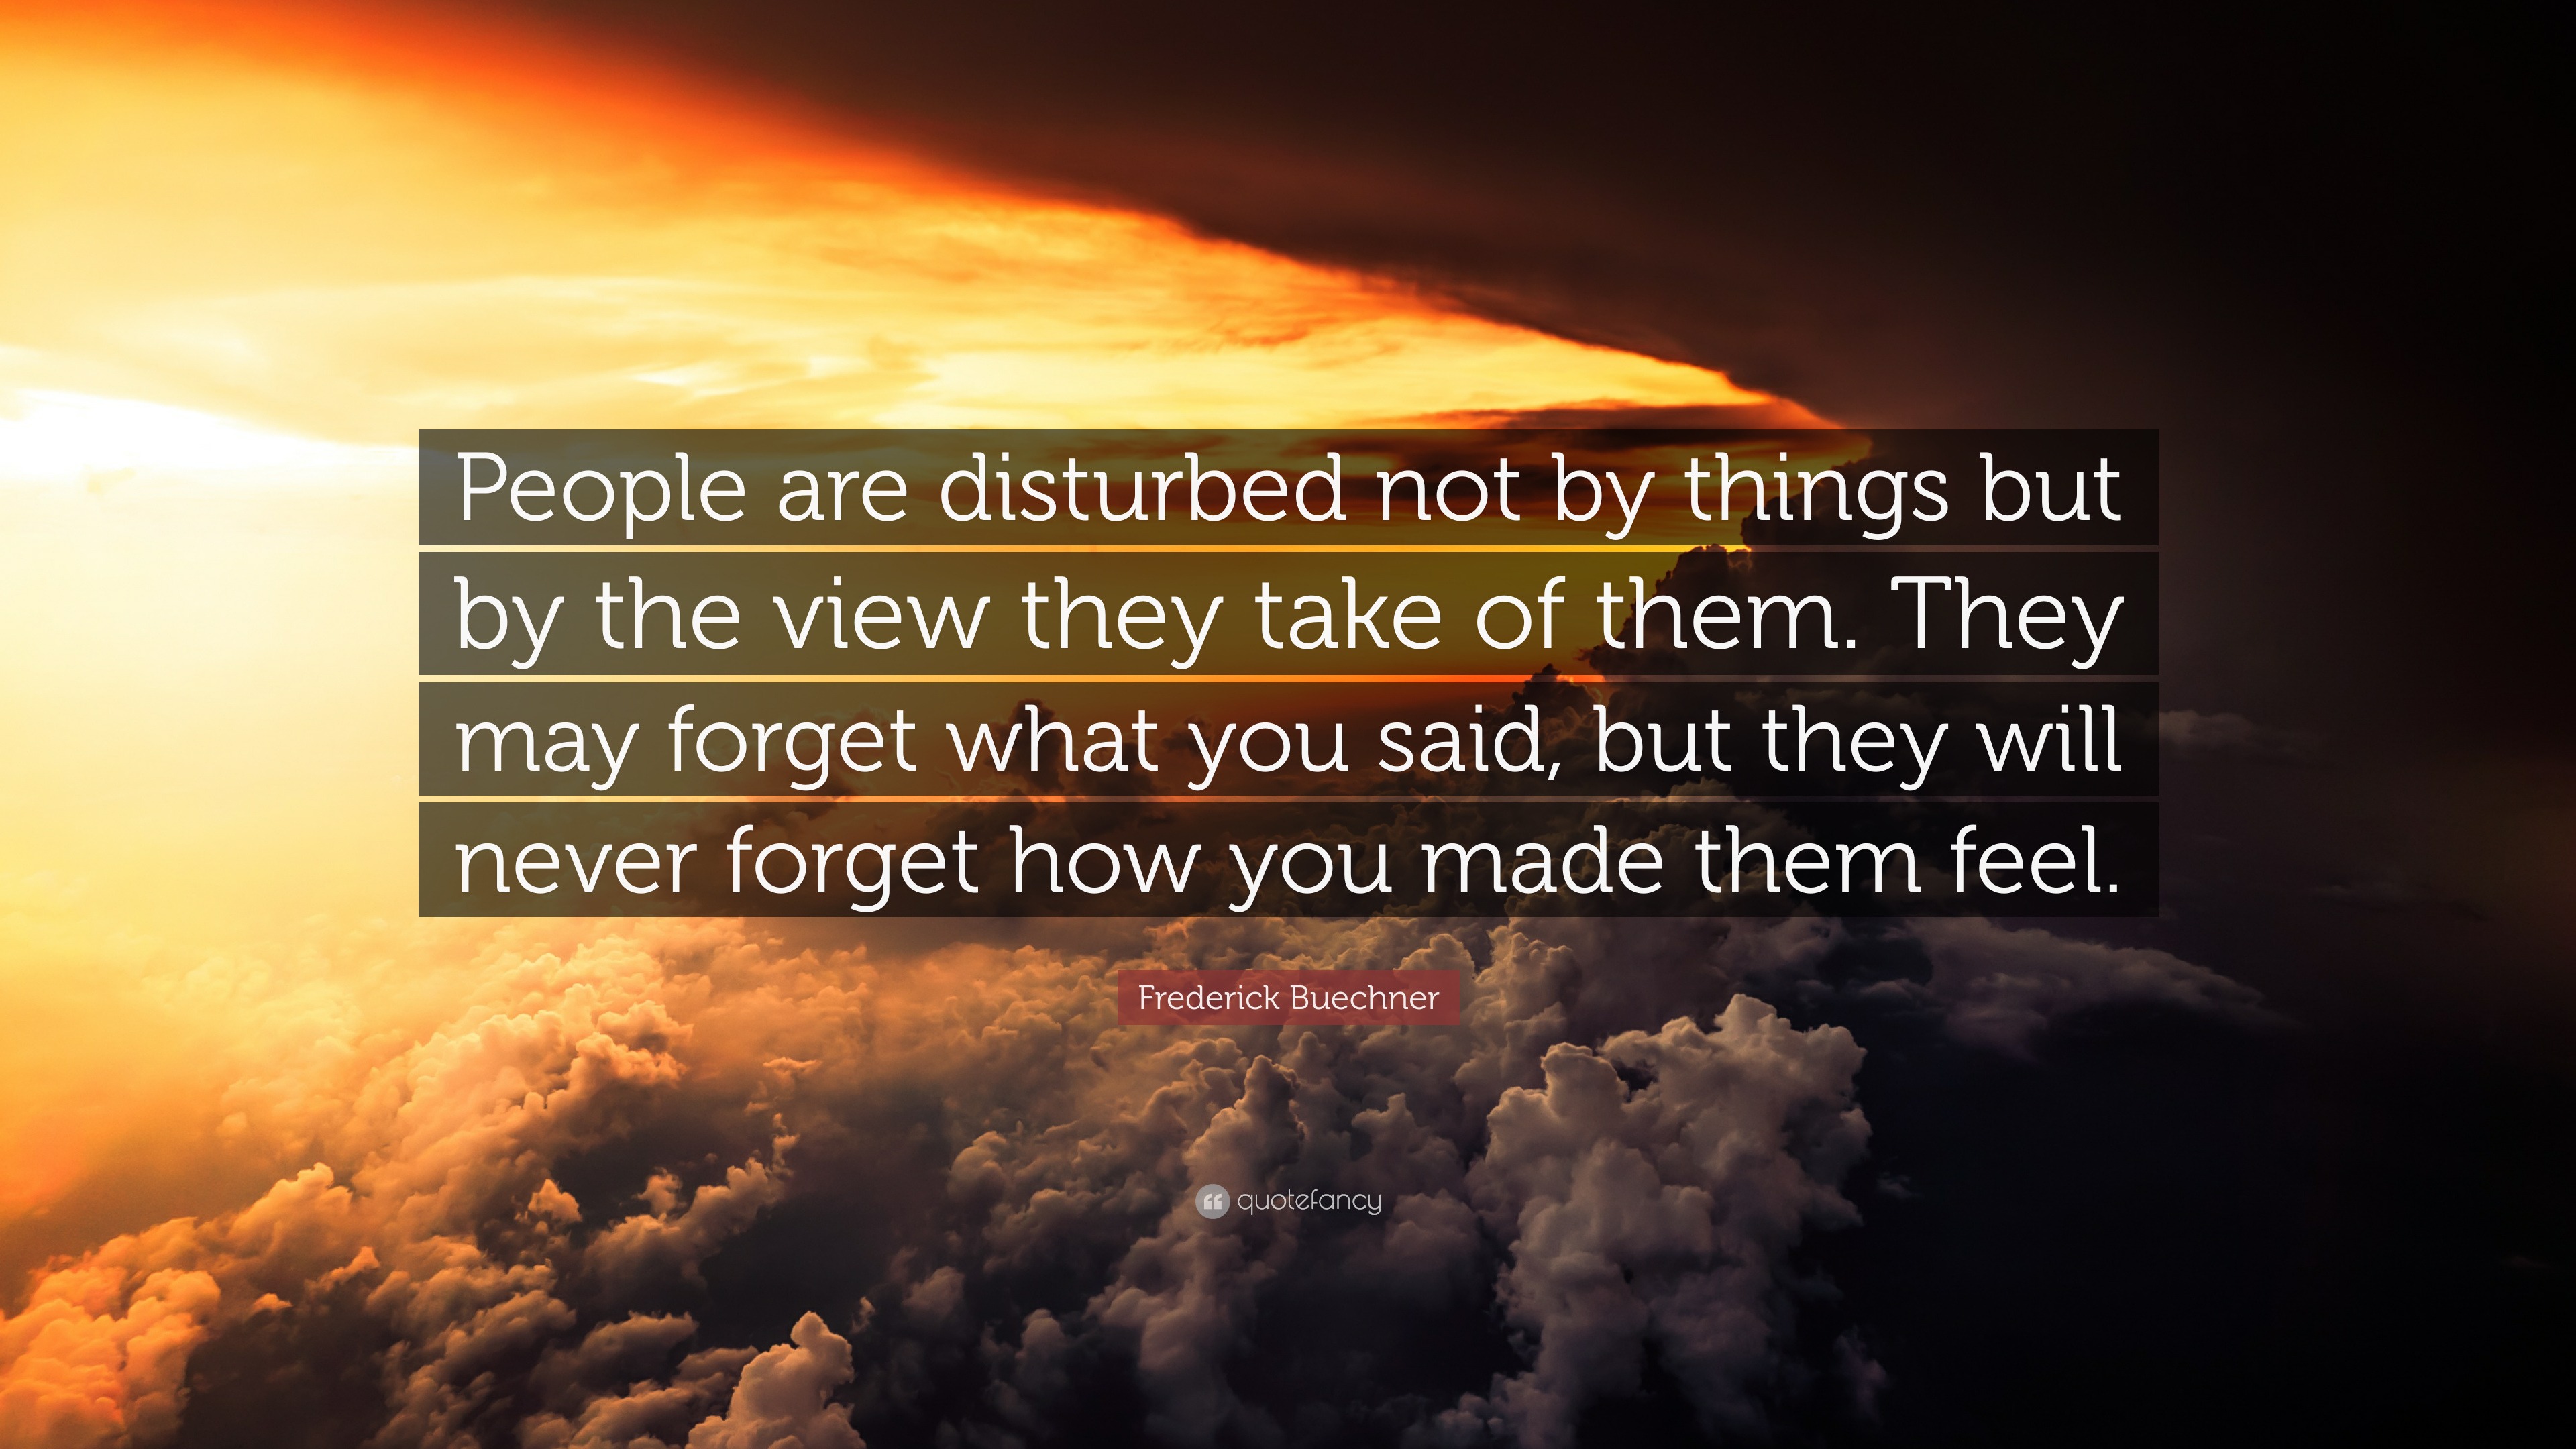 Frederick Buechner Quote: “People are disturbed not by things but by ...